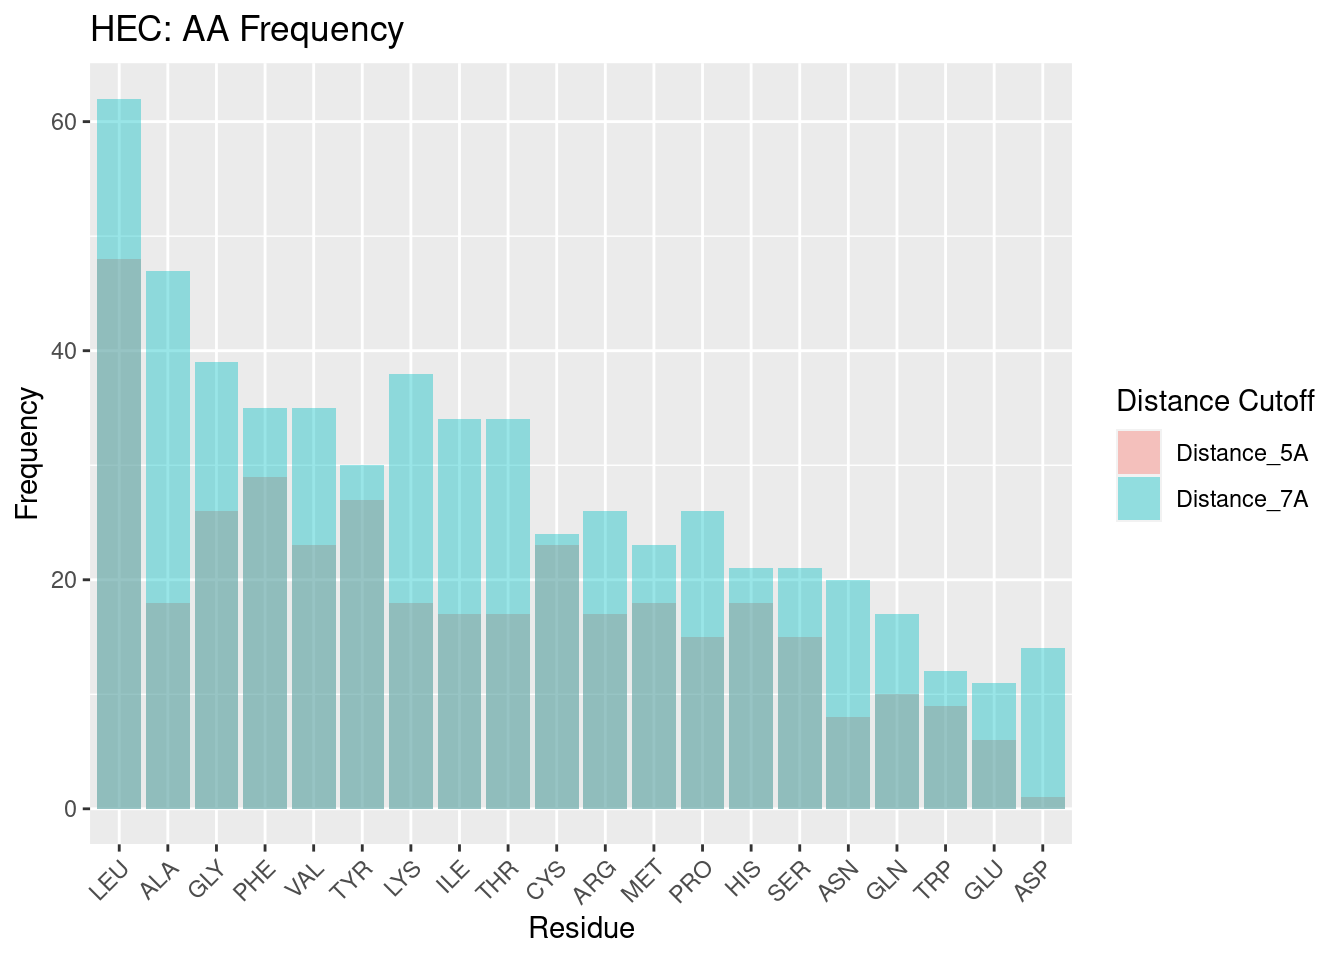 HEC: AA Frequency